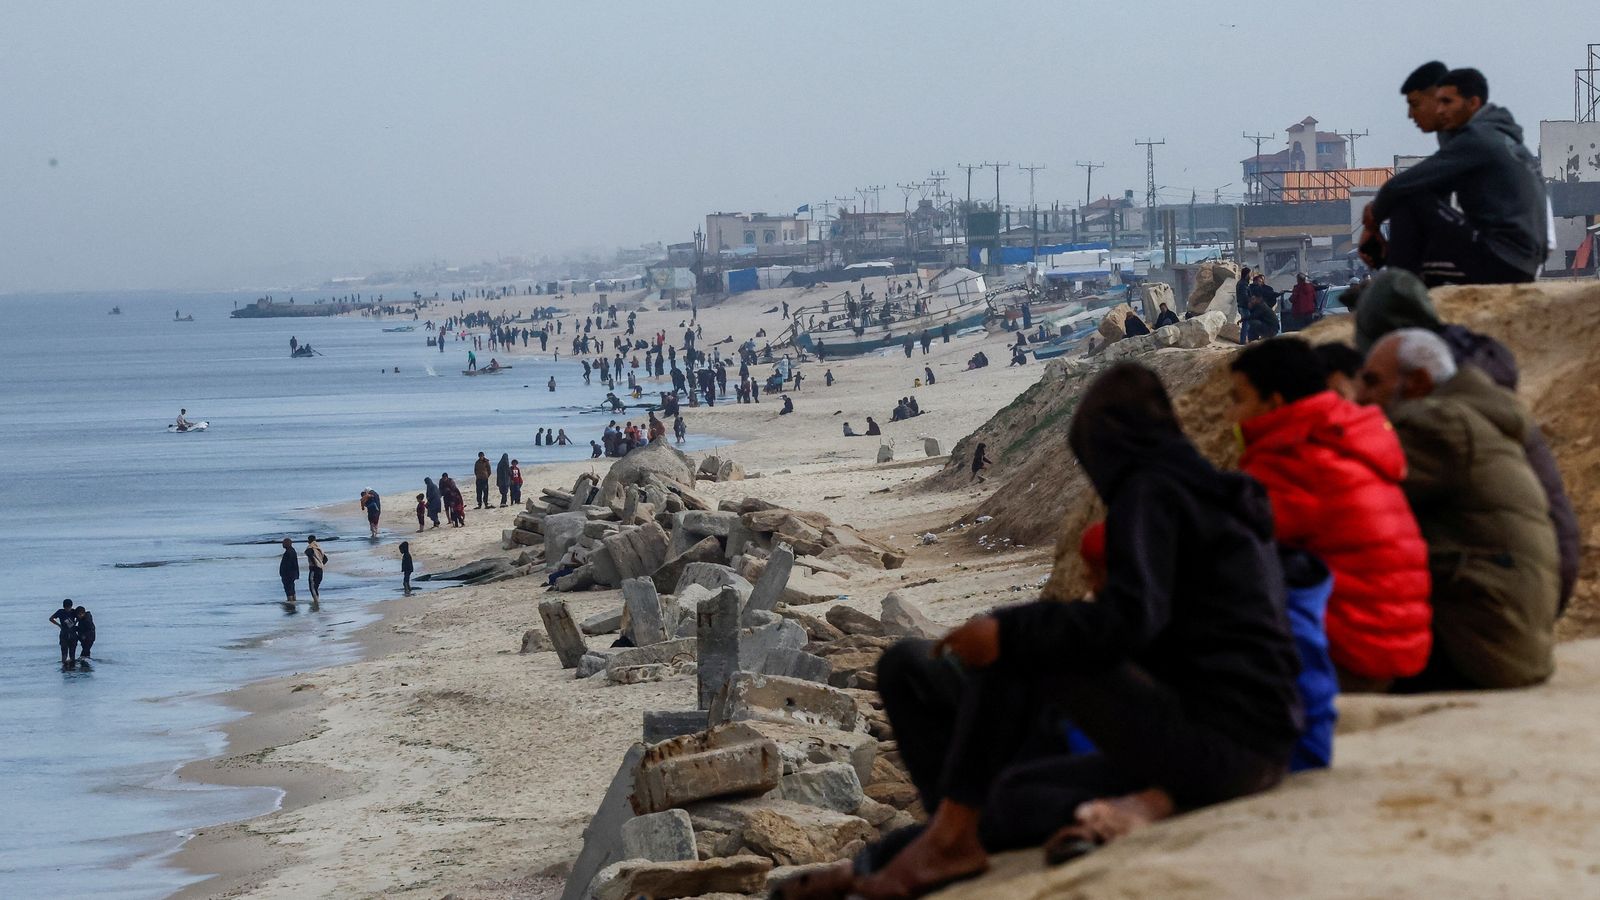 Gaza port announcement is a desperate policy decision Biden hoped never to have to make